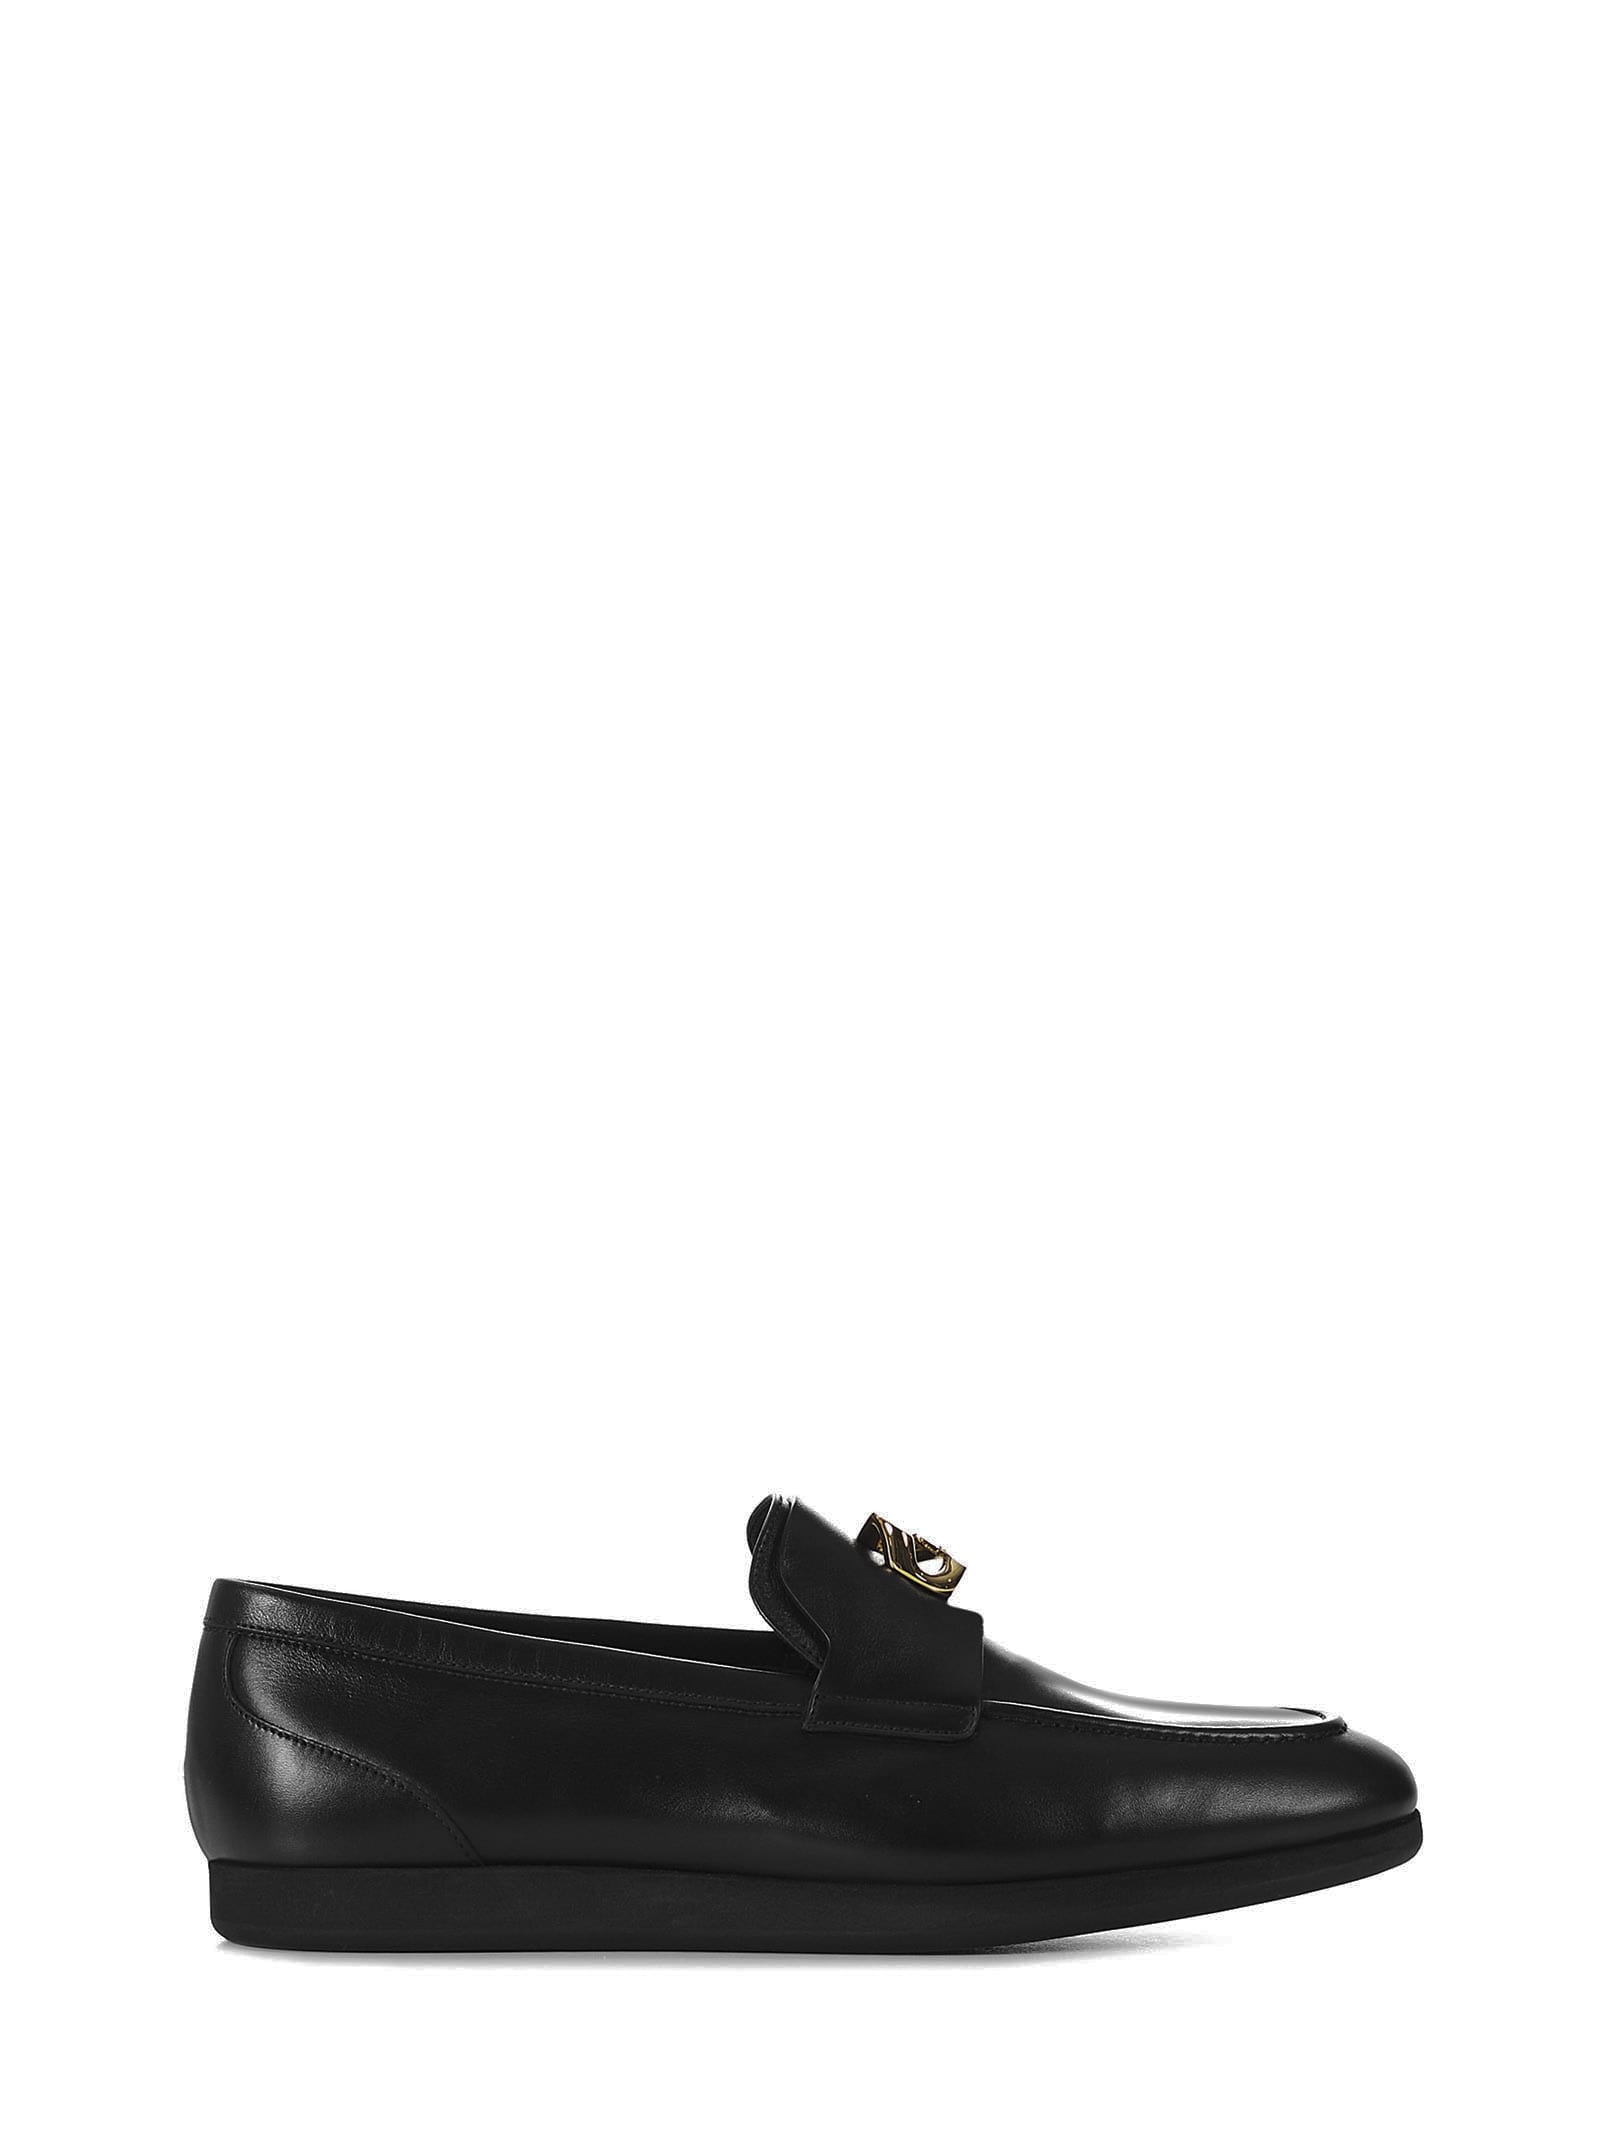 Givenchy G-chain Loafers | Smart Closet